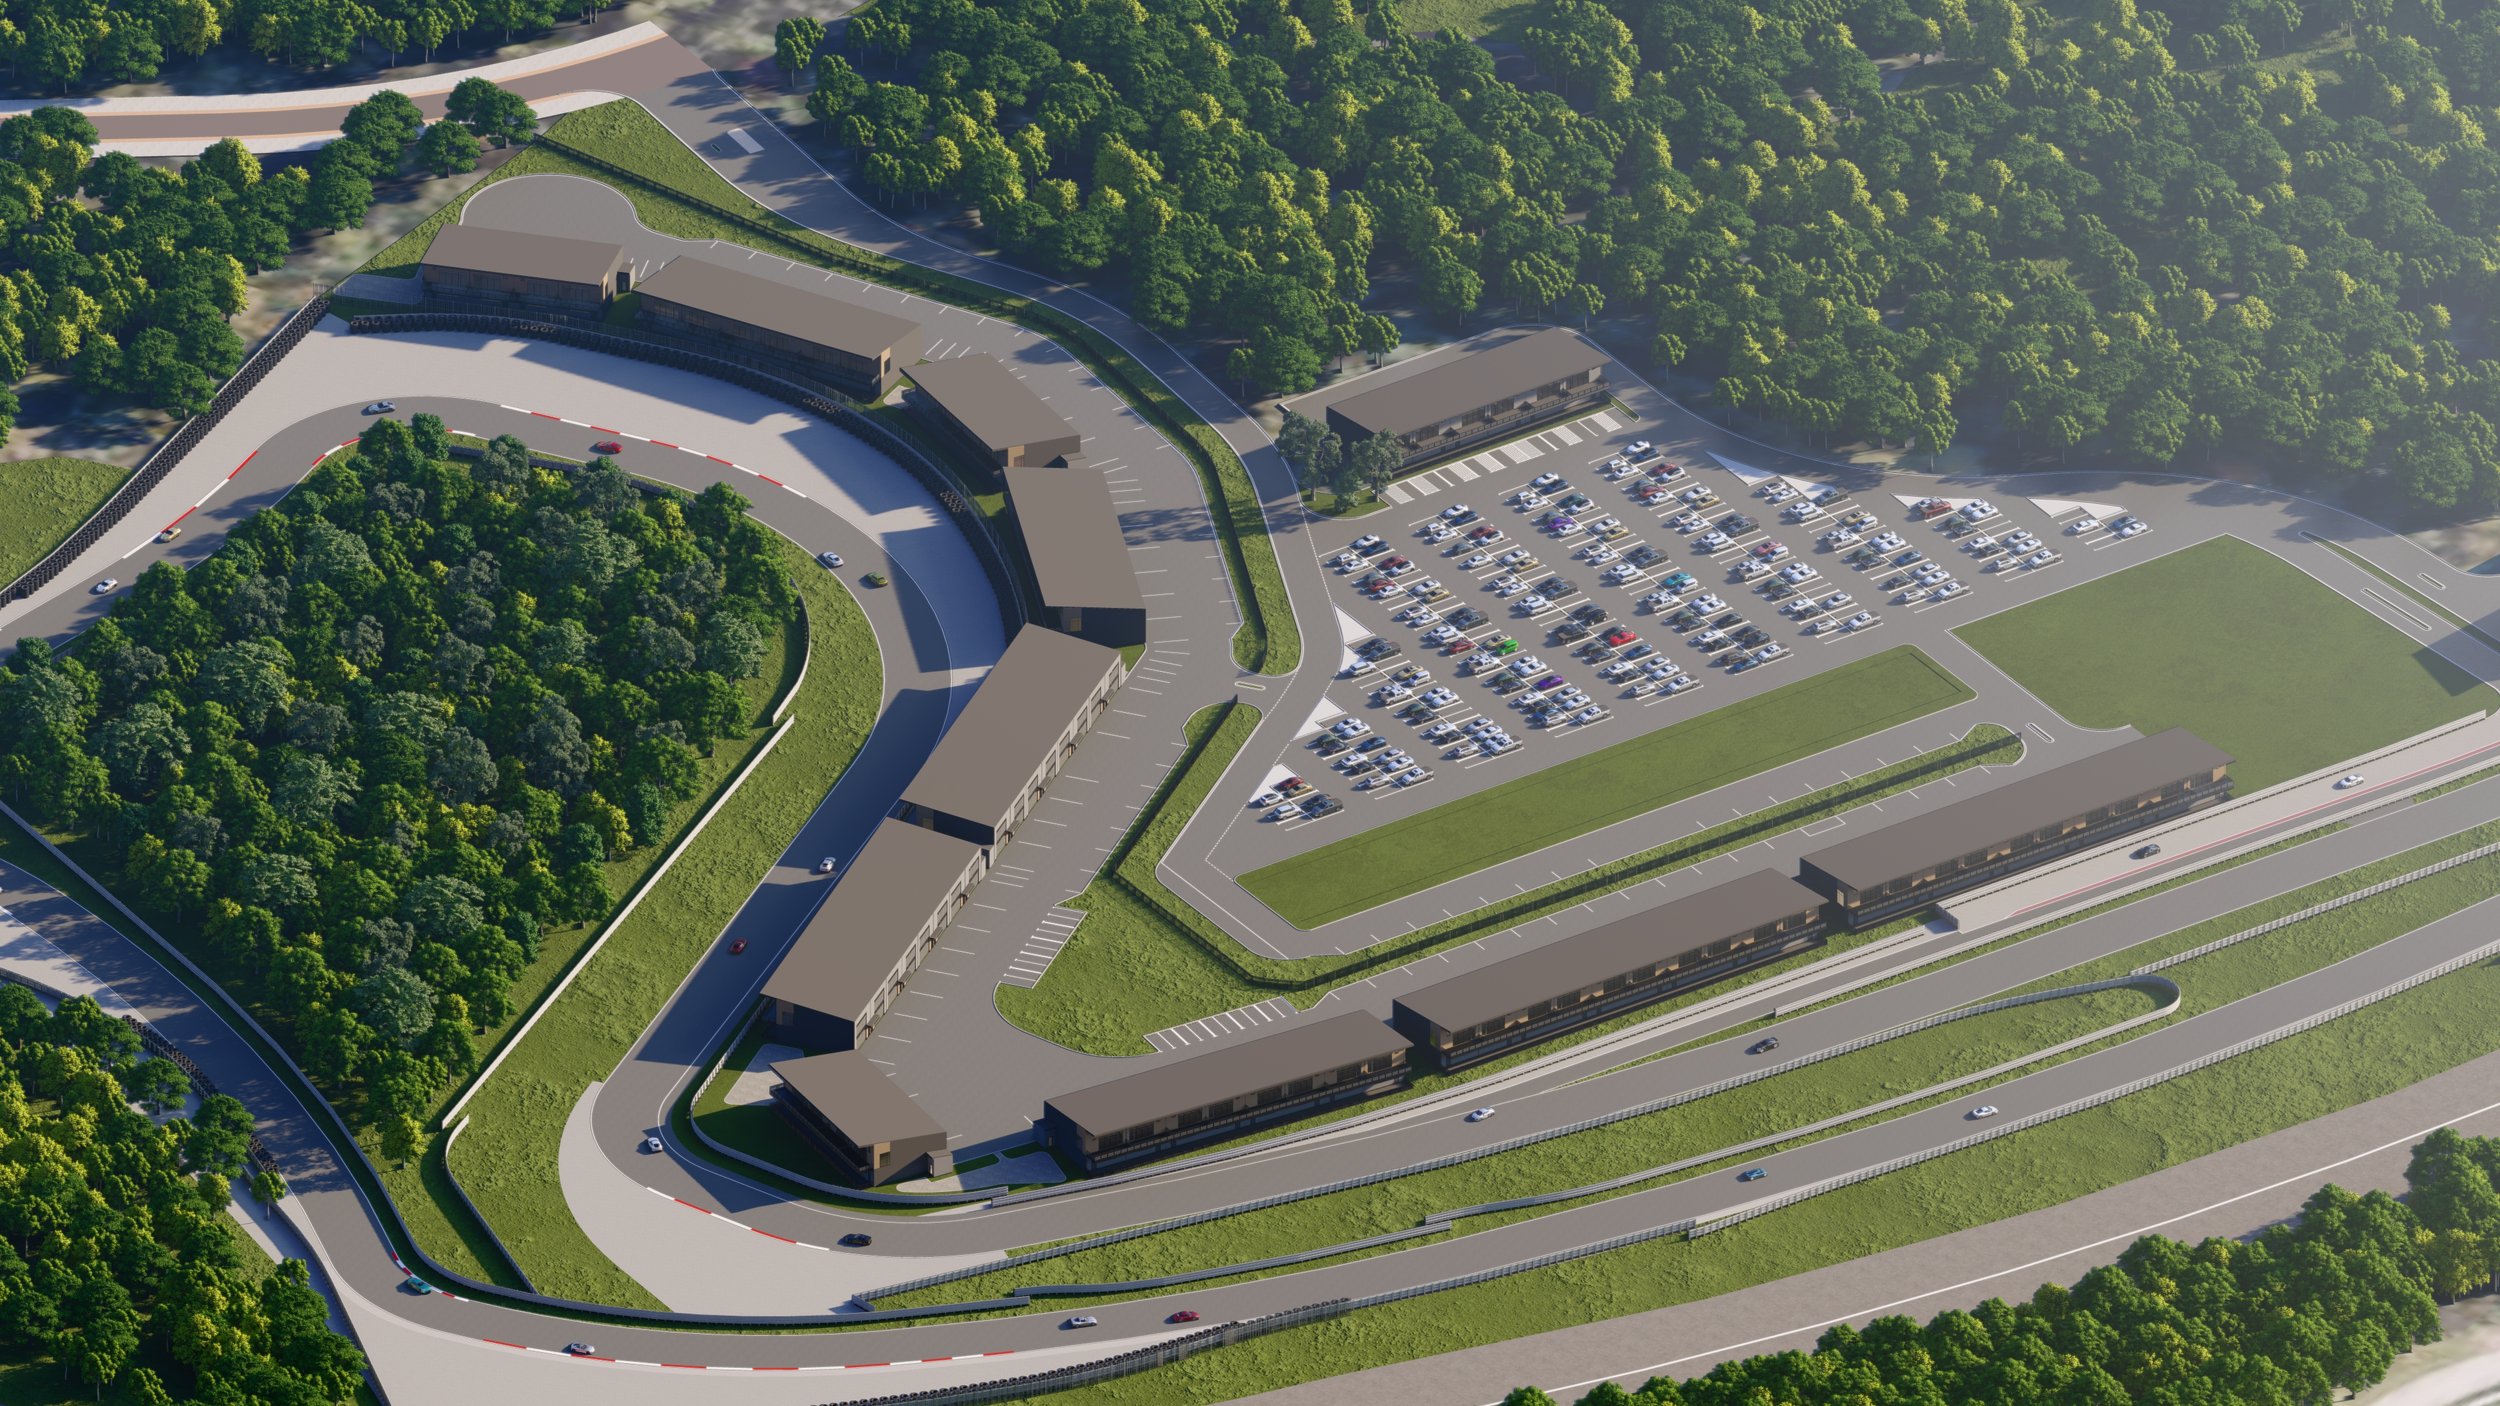 Driven International Race Track and Driving Course Design